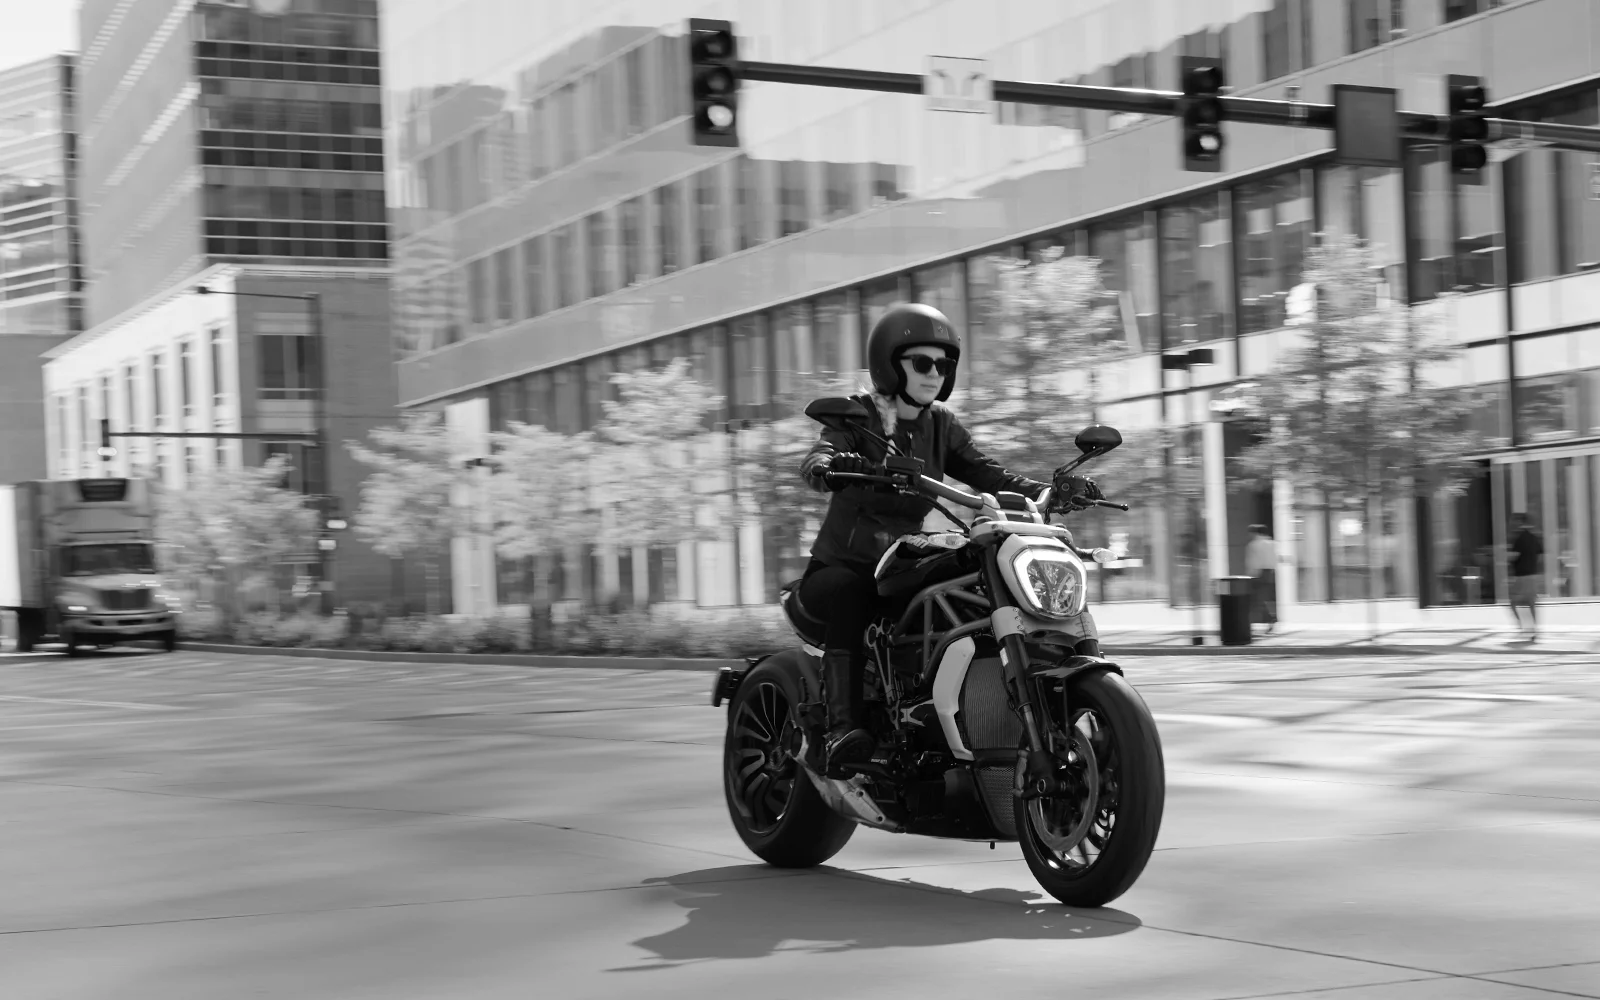 2023 Ducati XDIAVEL - Base for sale in the Pompano Beach, FL area. Get the best drive out price on 2023 Ducati XDIAVEL - Base and compare.